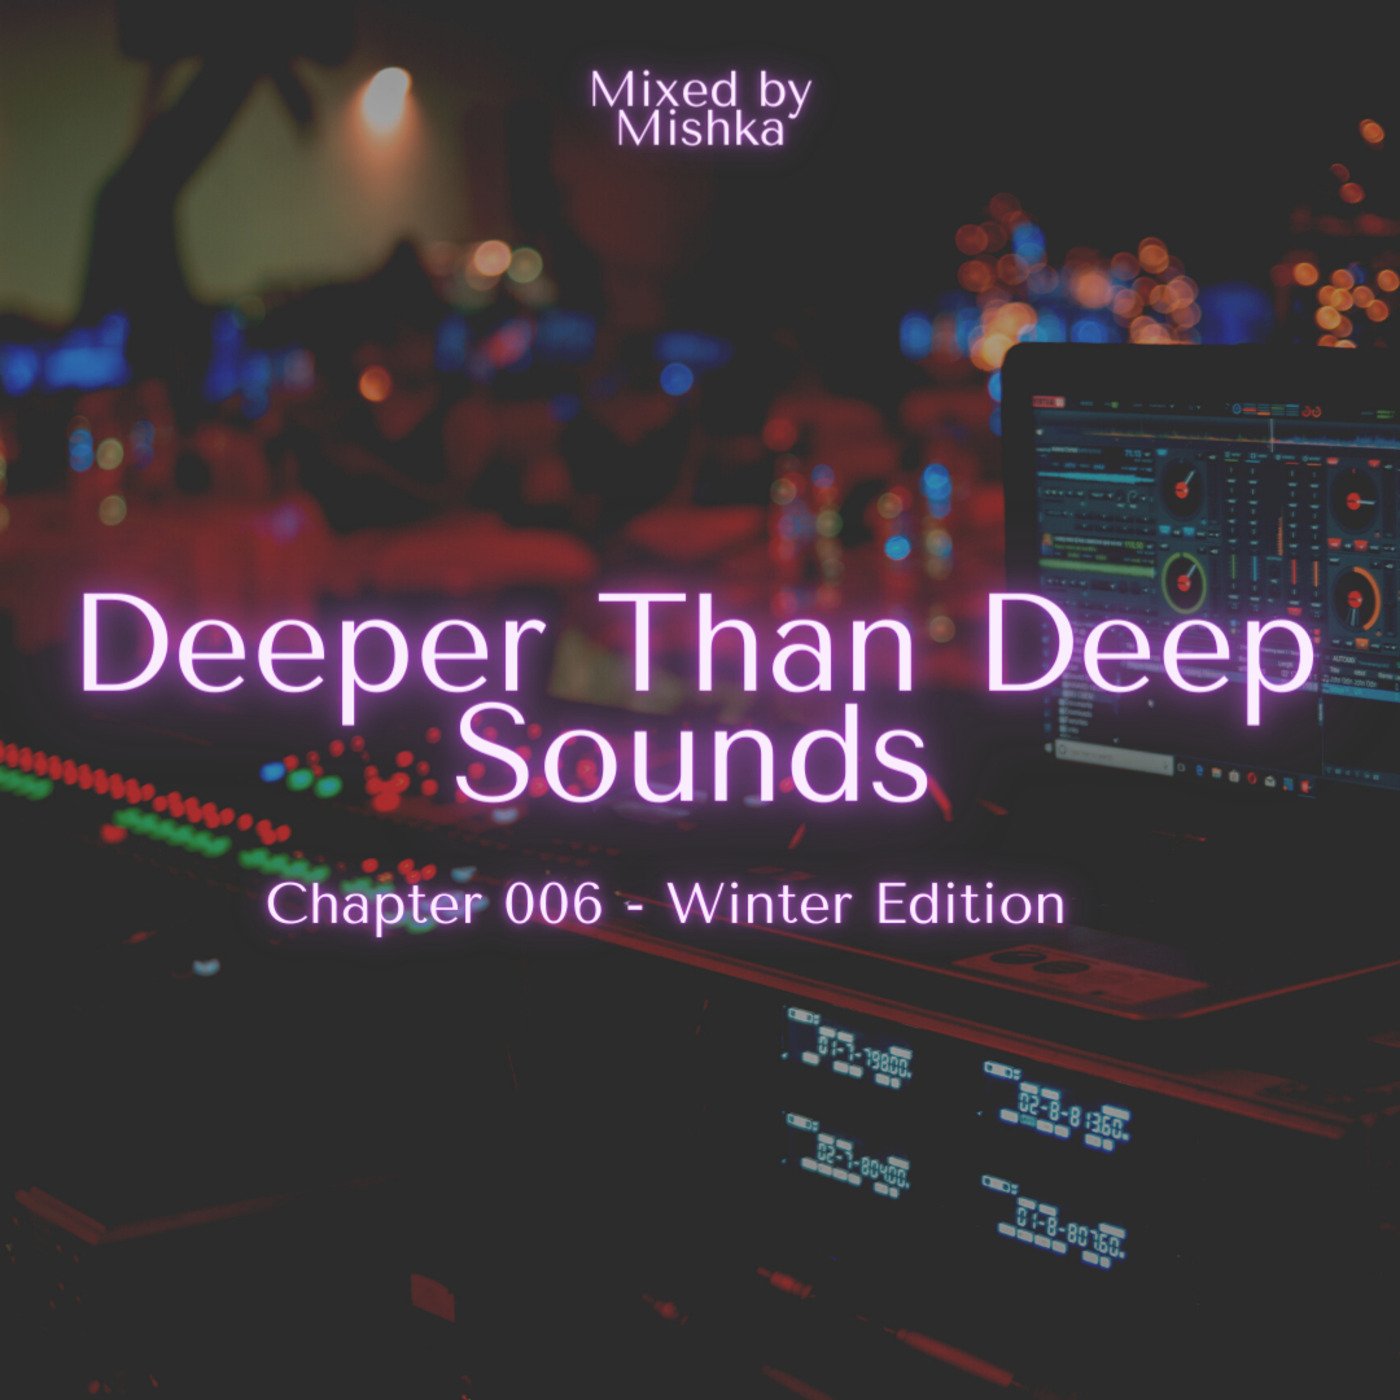 Deeper Than Deep Sounds - Chapter 006 Mixed by Mishka